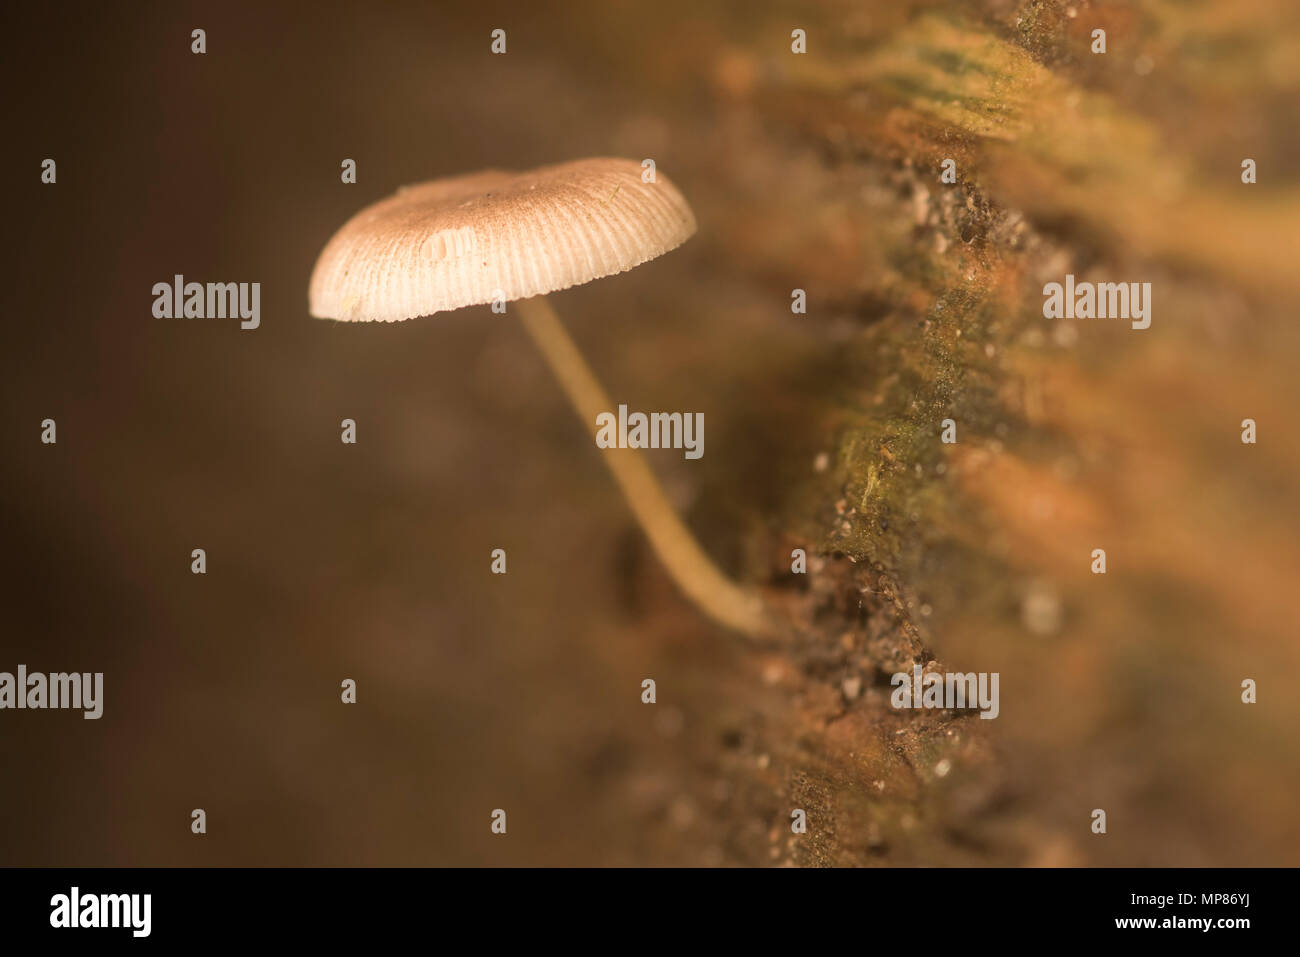 A small unidentified mushroom grows out of a rotten log. Stock Photo